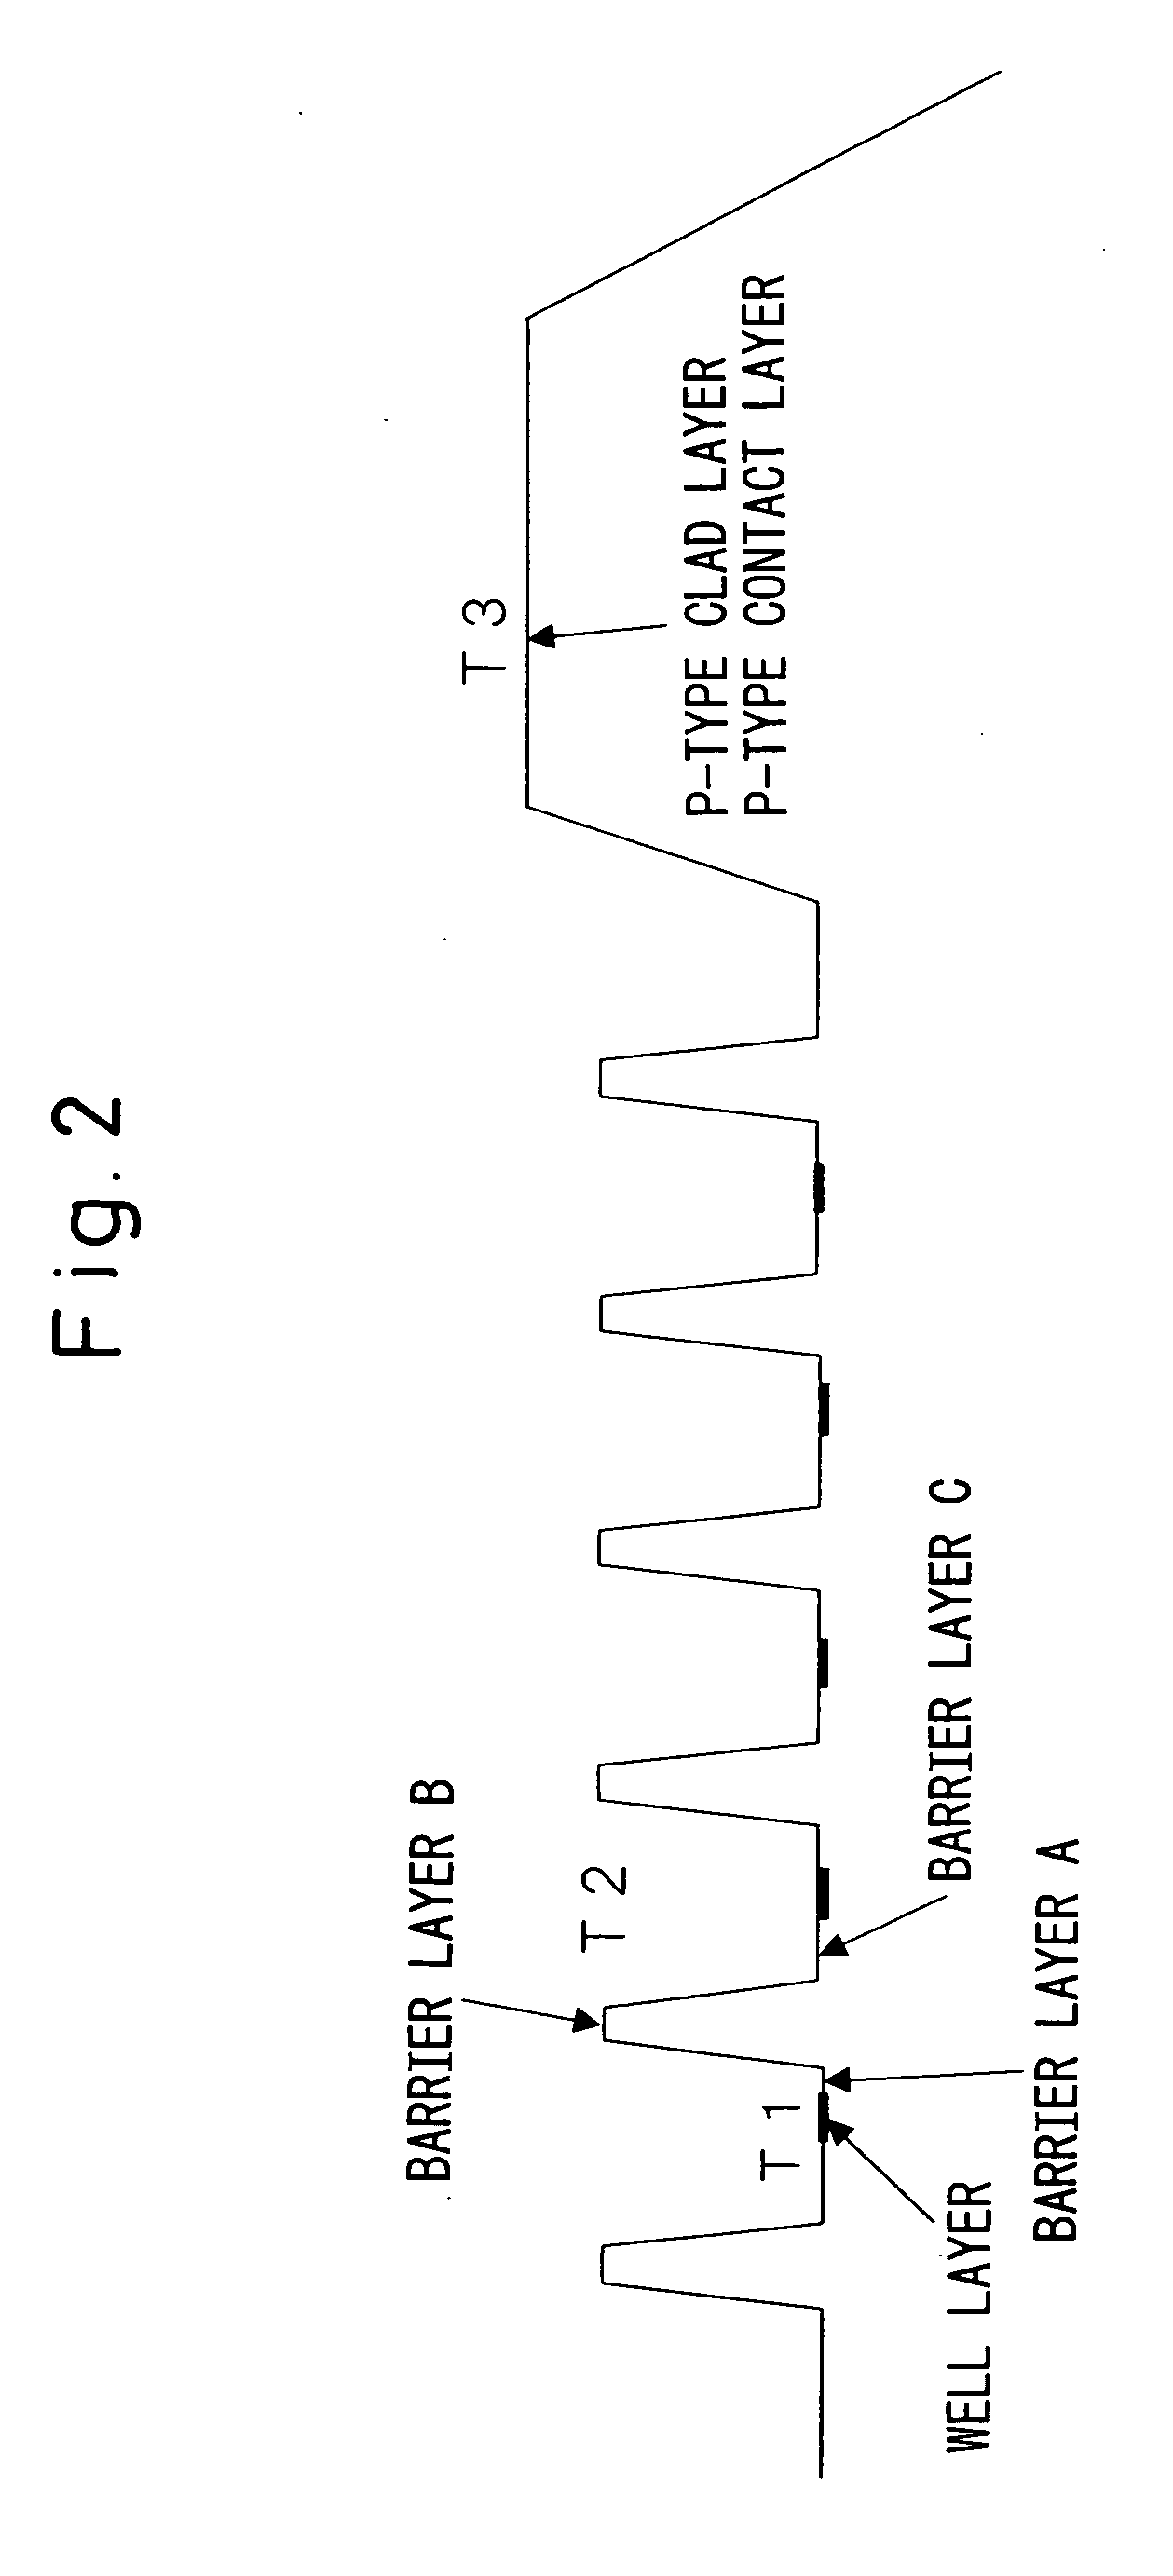 Production method of gallium nitride-based compound semiconductor multilayer structure